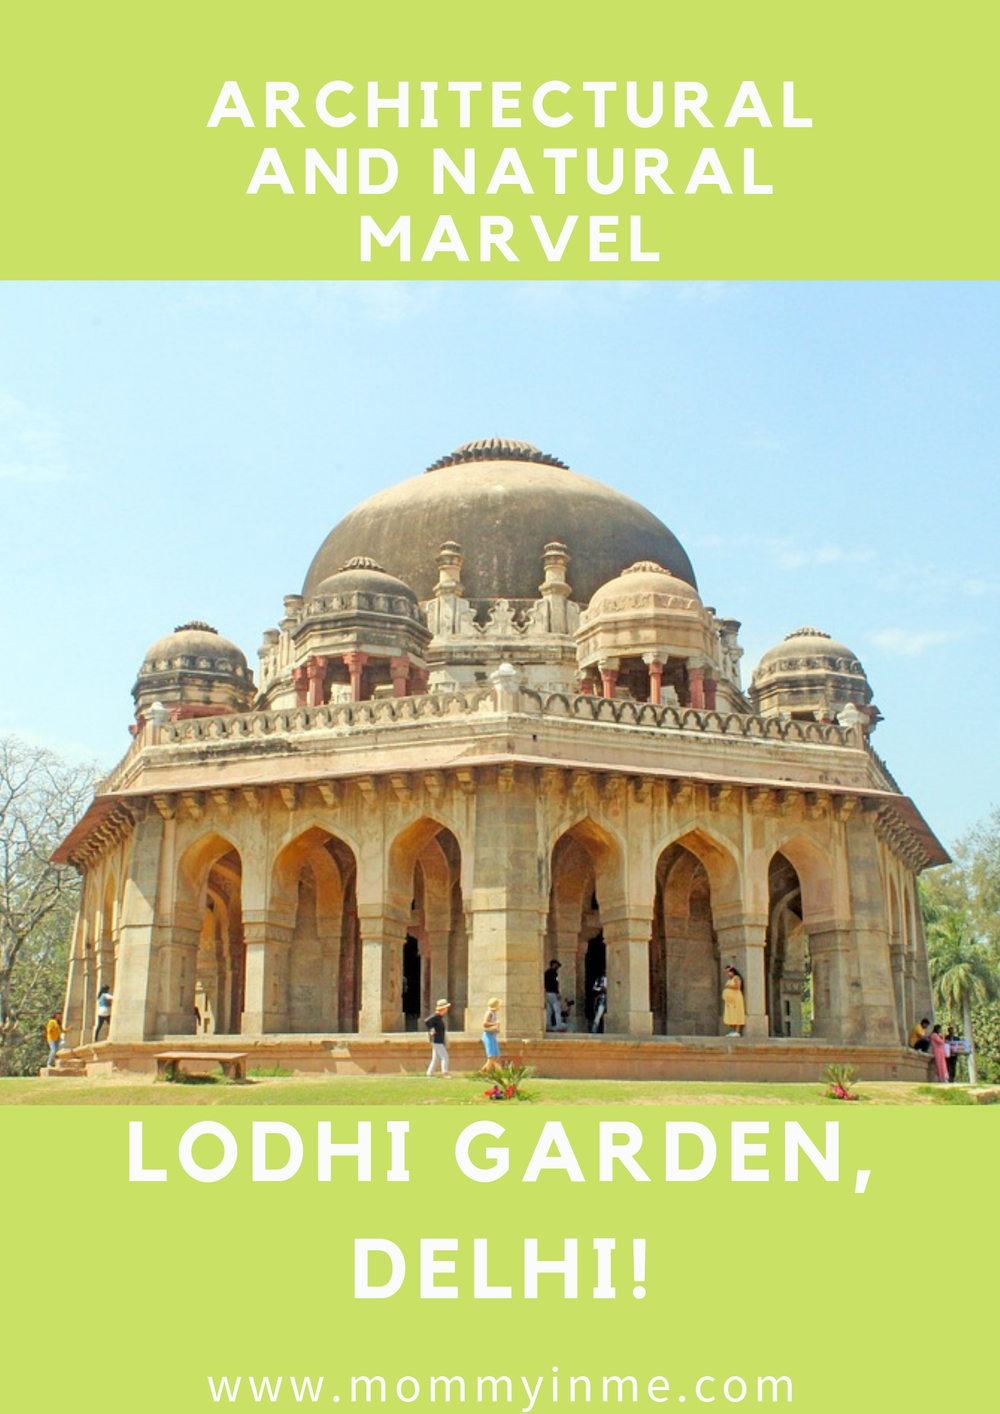 What are the best tourist attractions in Delhi? Delhi is rich in history and heritage, and Lodhi Garden is one such nature's paradise you ought to see. A must visit attraction if you are travelling to Delhi. #Delhi #sodelhi #mustvisit #lodhigarden #historical #architecture #historyofdelhi